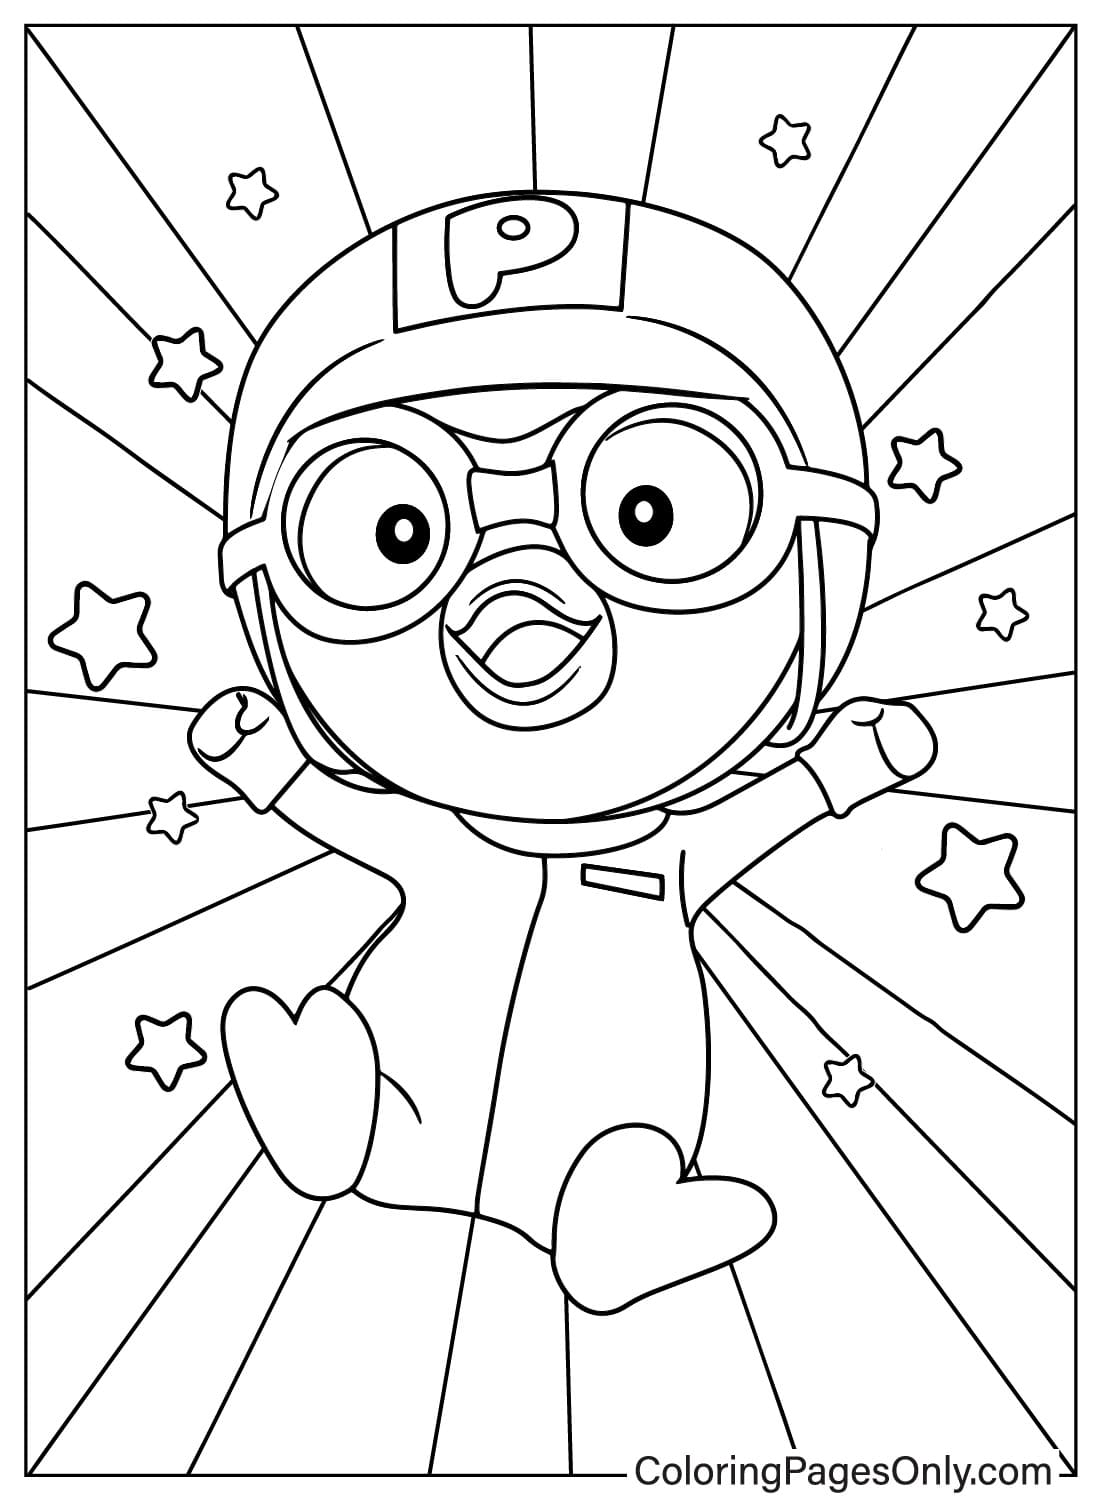 Pororo Cute Coloring Page from Pororo the Little Penguin